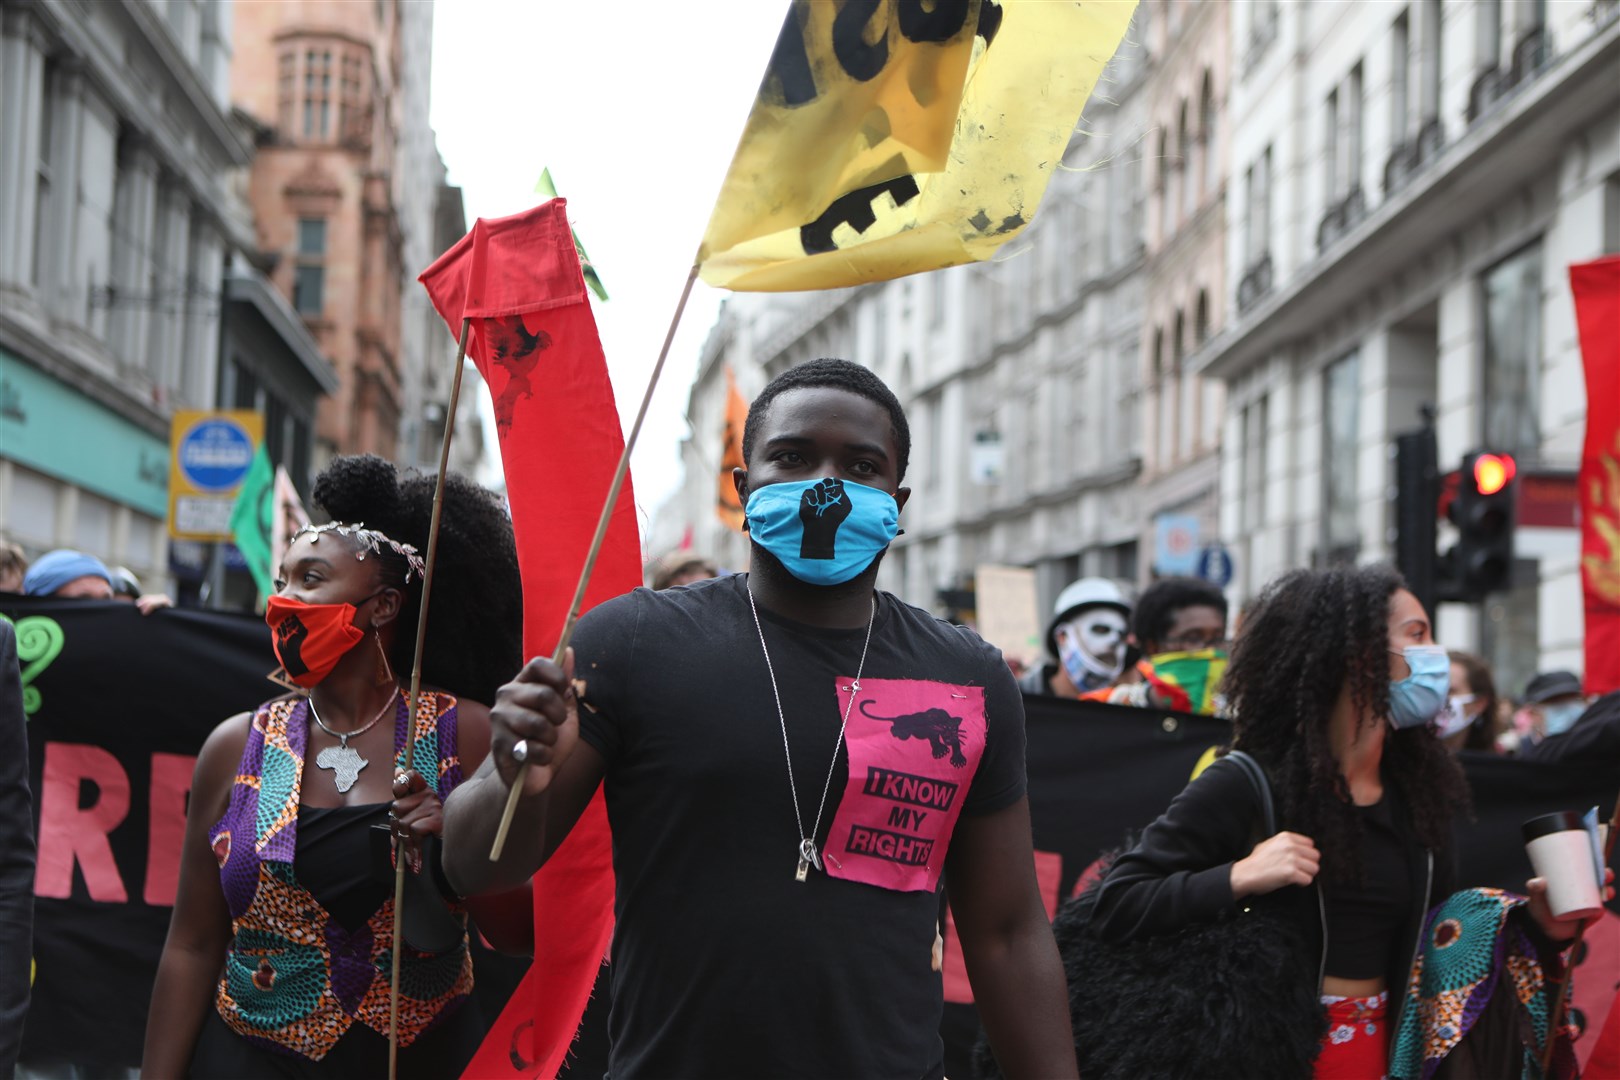 Protesters walking through the City of London (Luciana Guerra/PA)